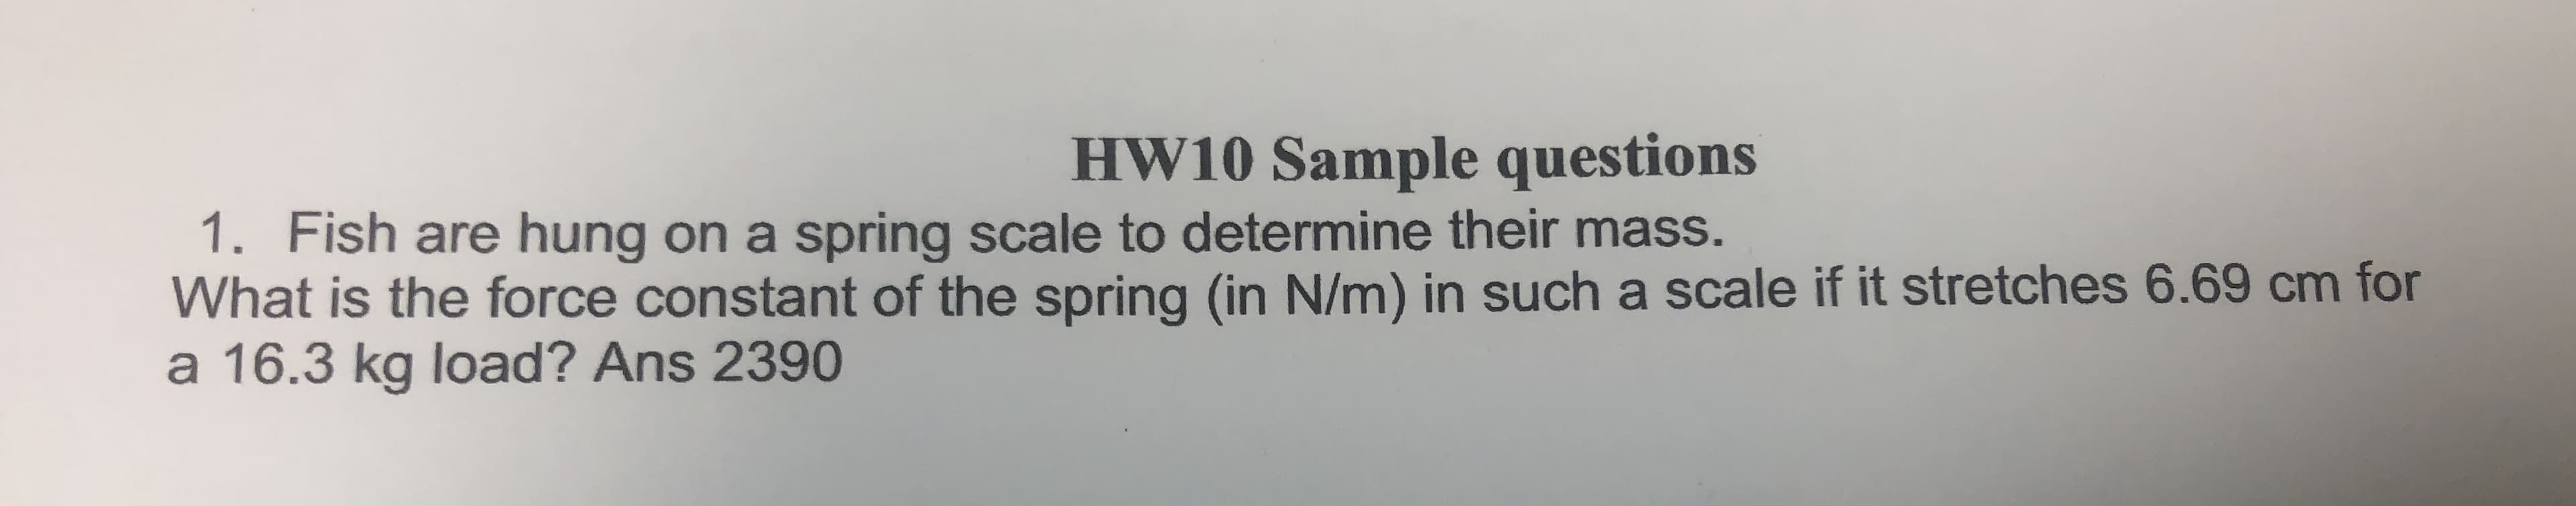 HW10 Sample questions
1. Fish are hung on a spring scale to determine their mass.
What is the force constant of the spring (in N/m) in such a scale if it stretches 6.69 cm for
a 16.3 kg load? Ans 2390
